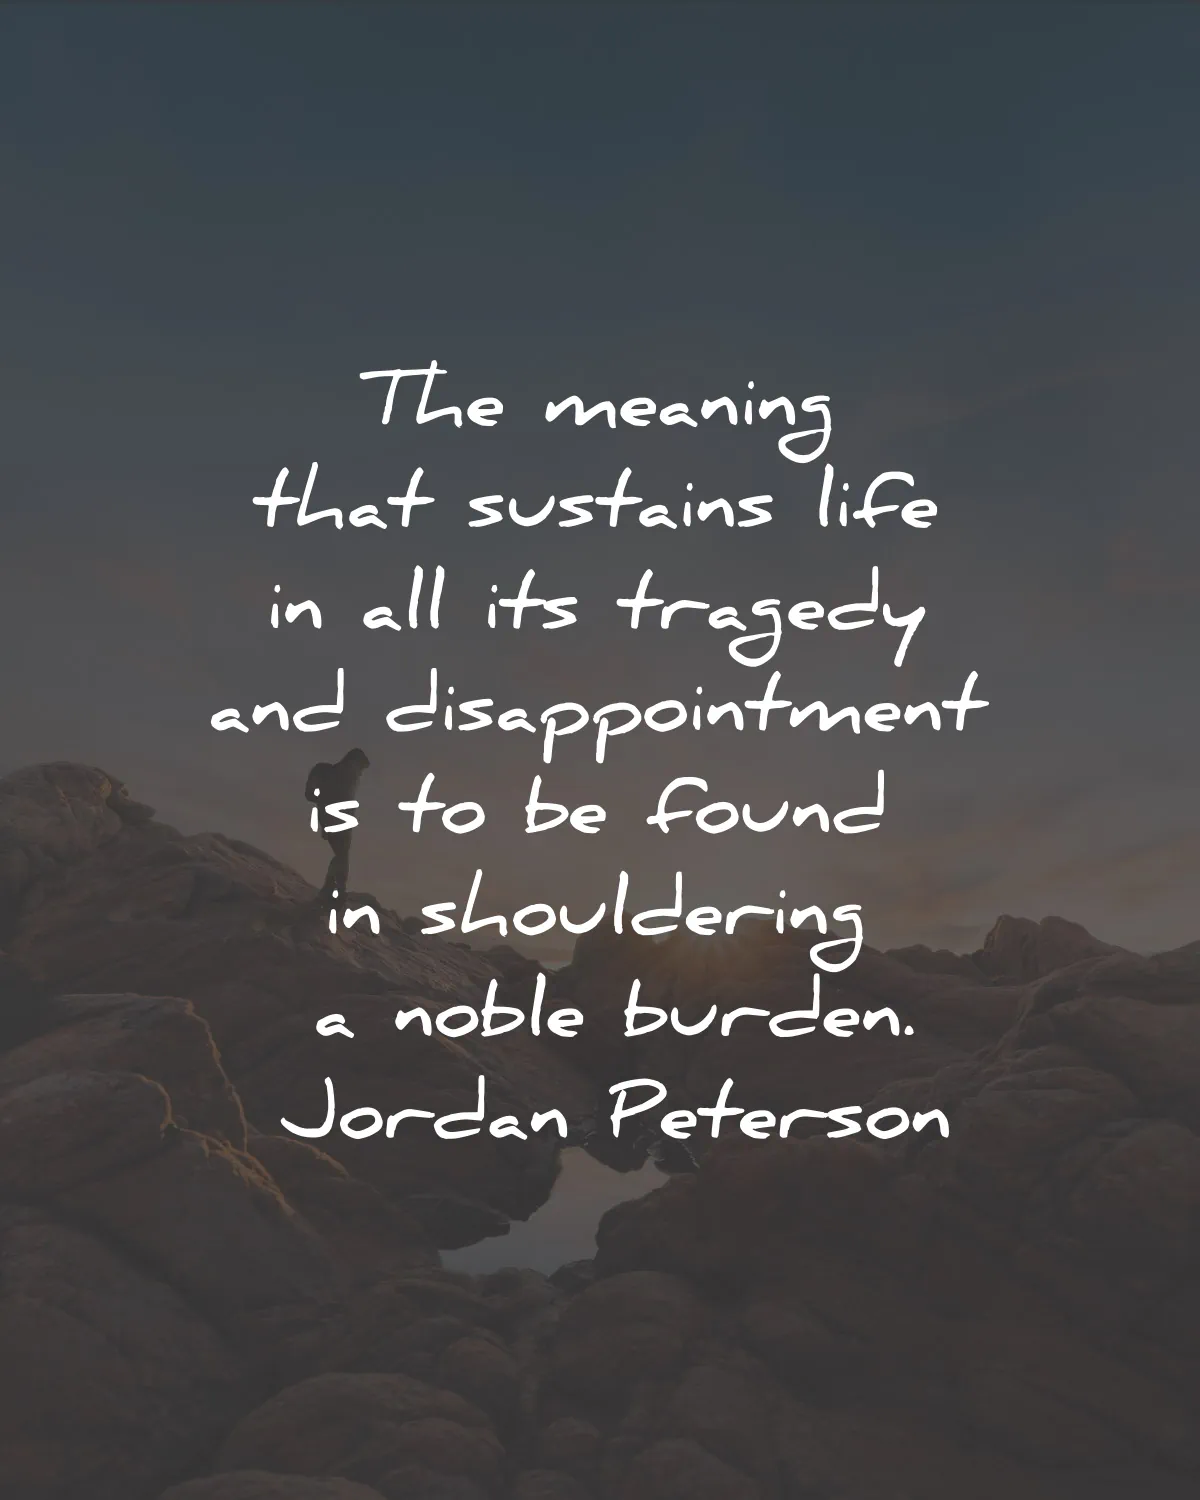 beyond order quotes summary jordan peterson meaning sustains life noble burden wisdom